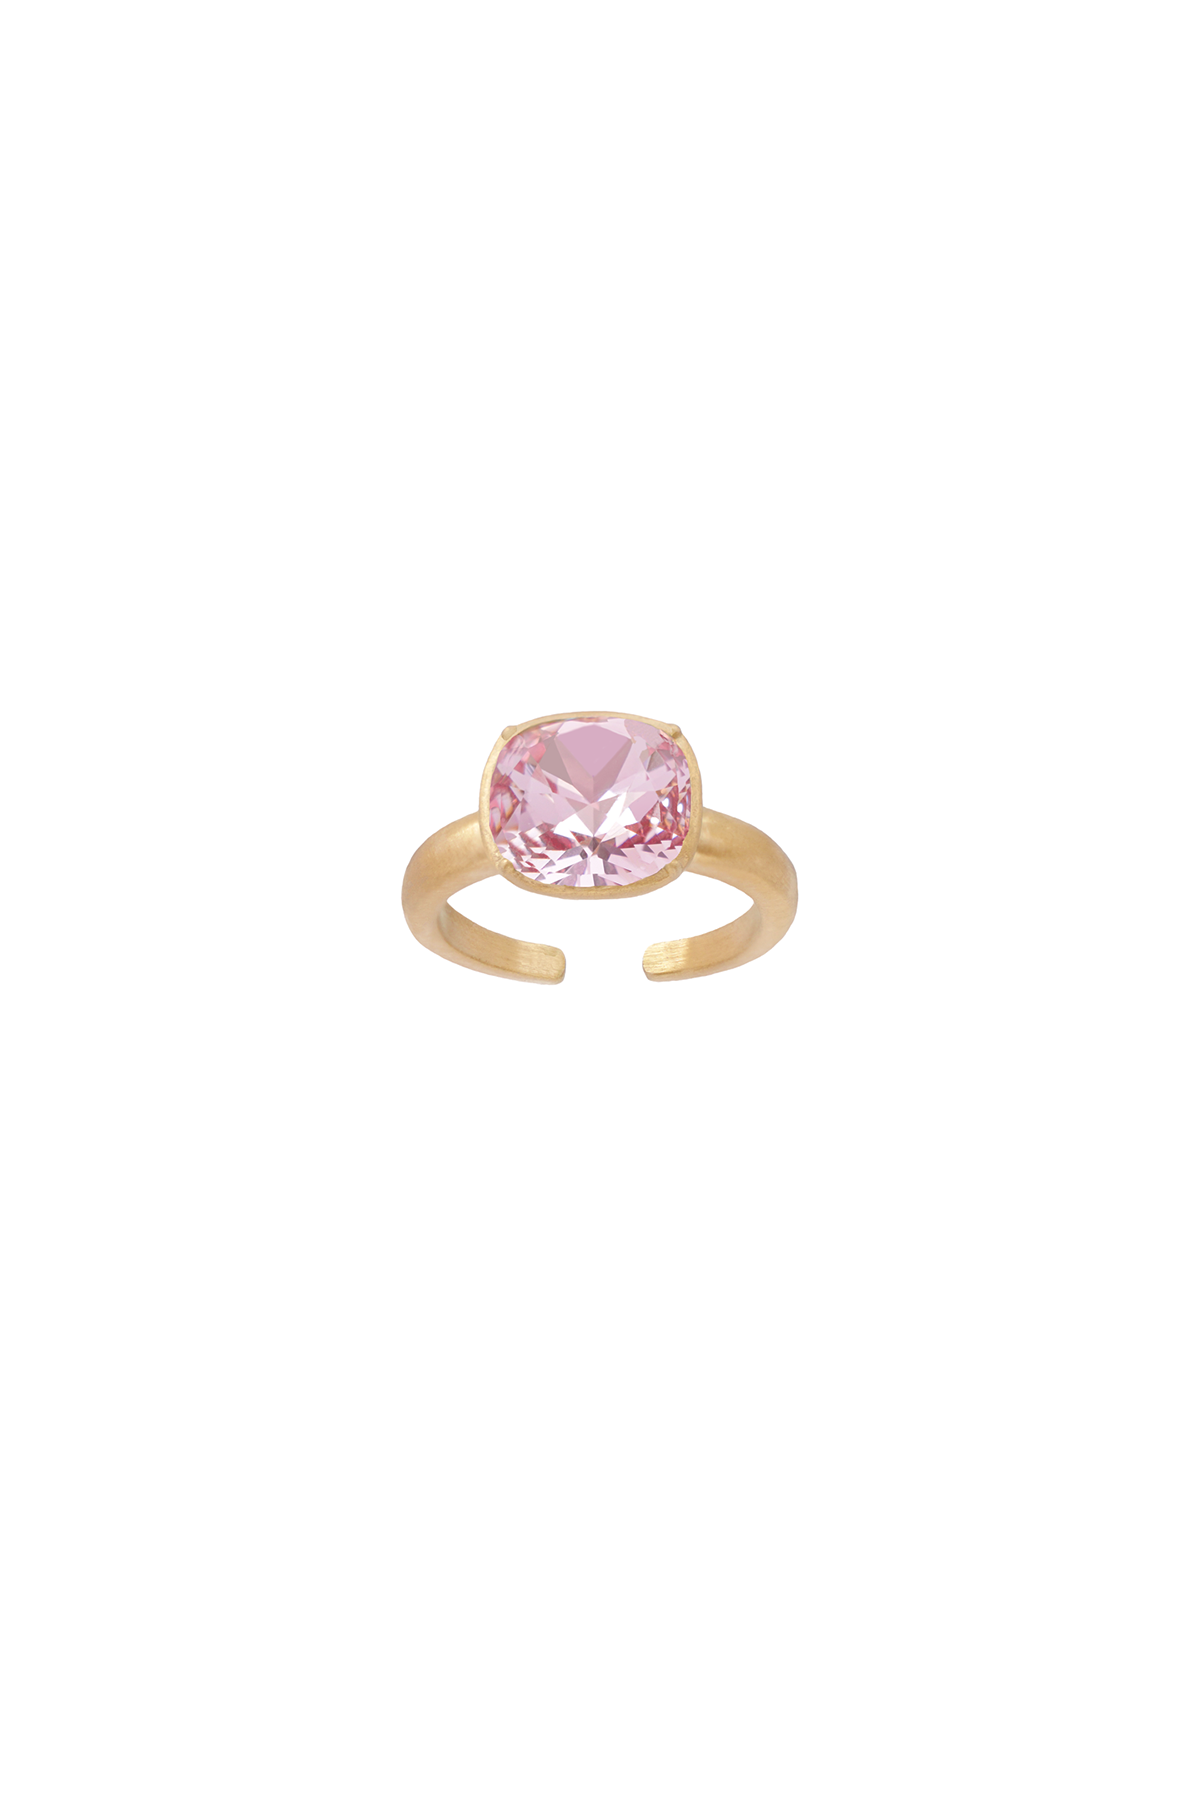 Carla Crystal ring - Pink favourite, Adjustable